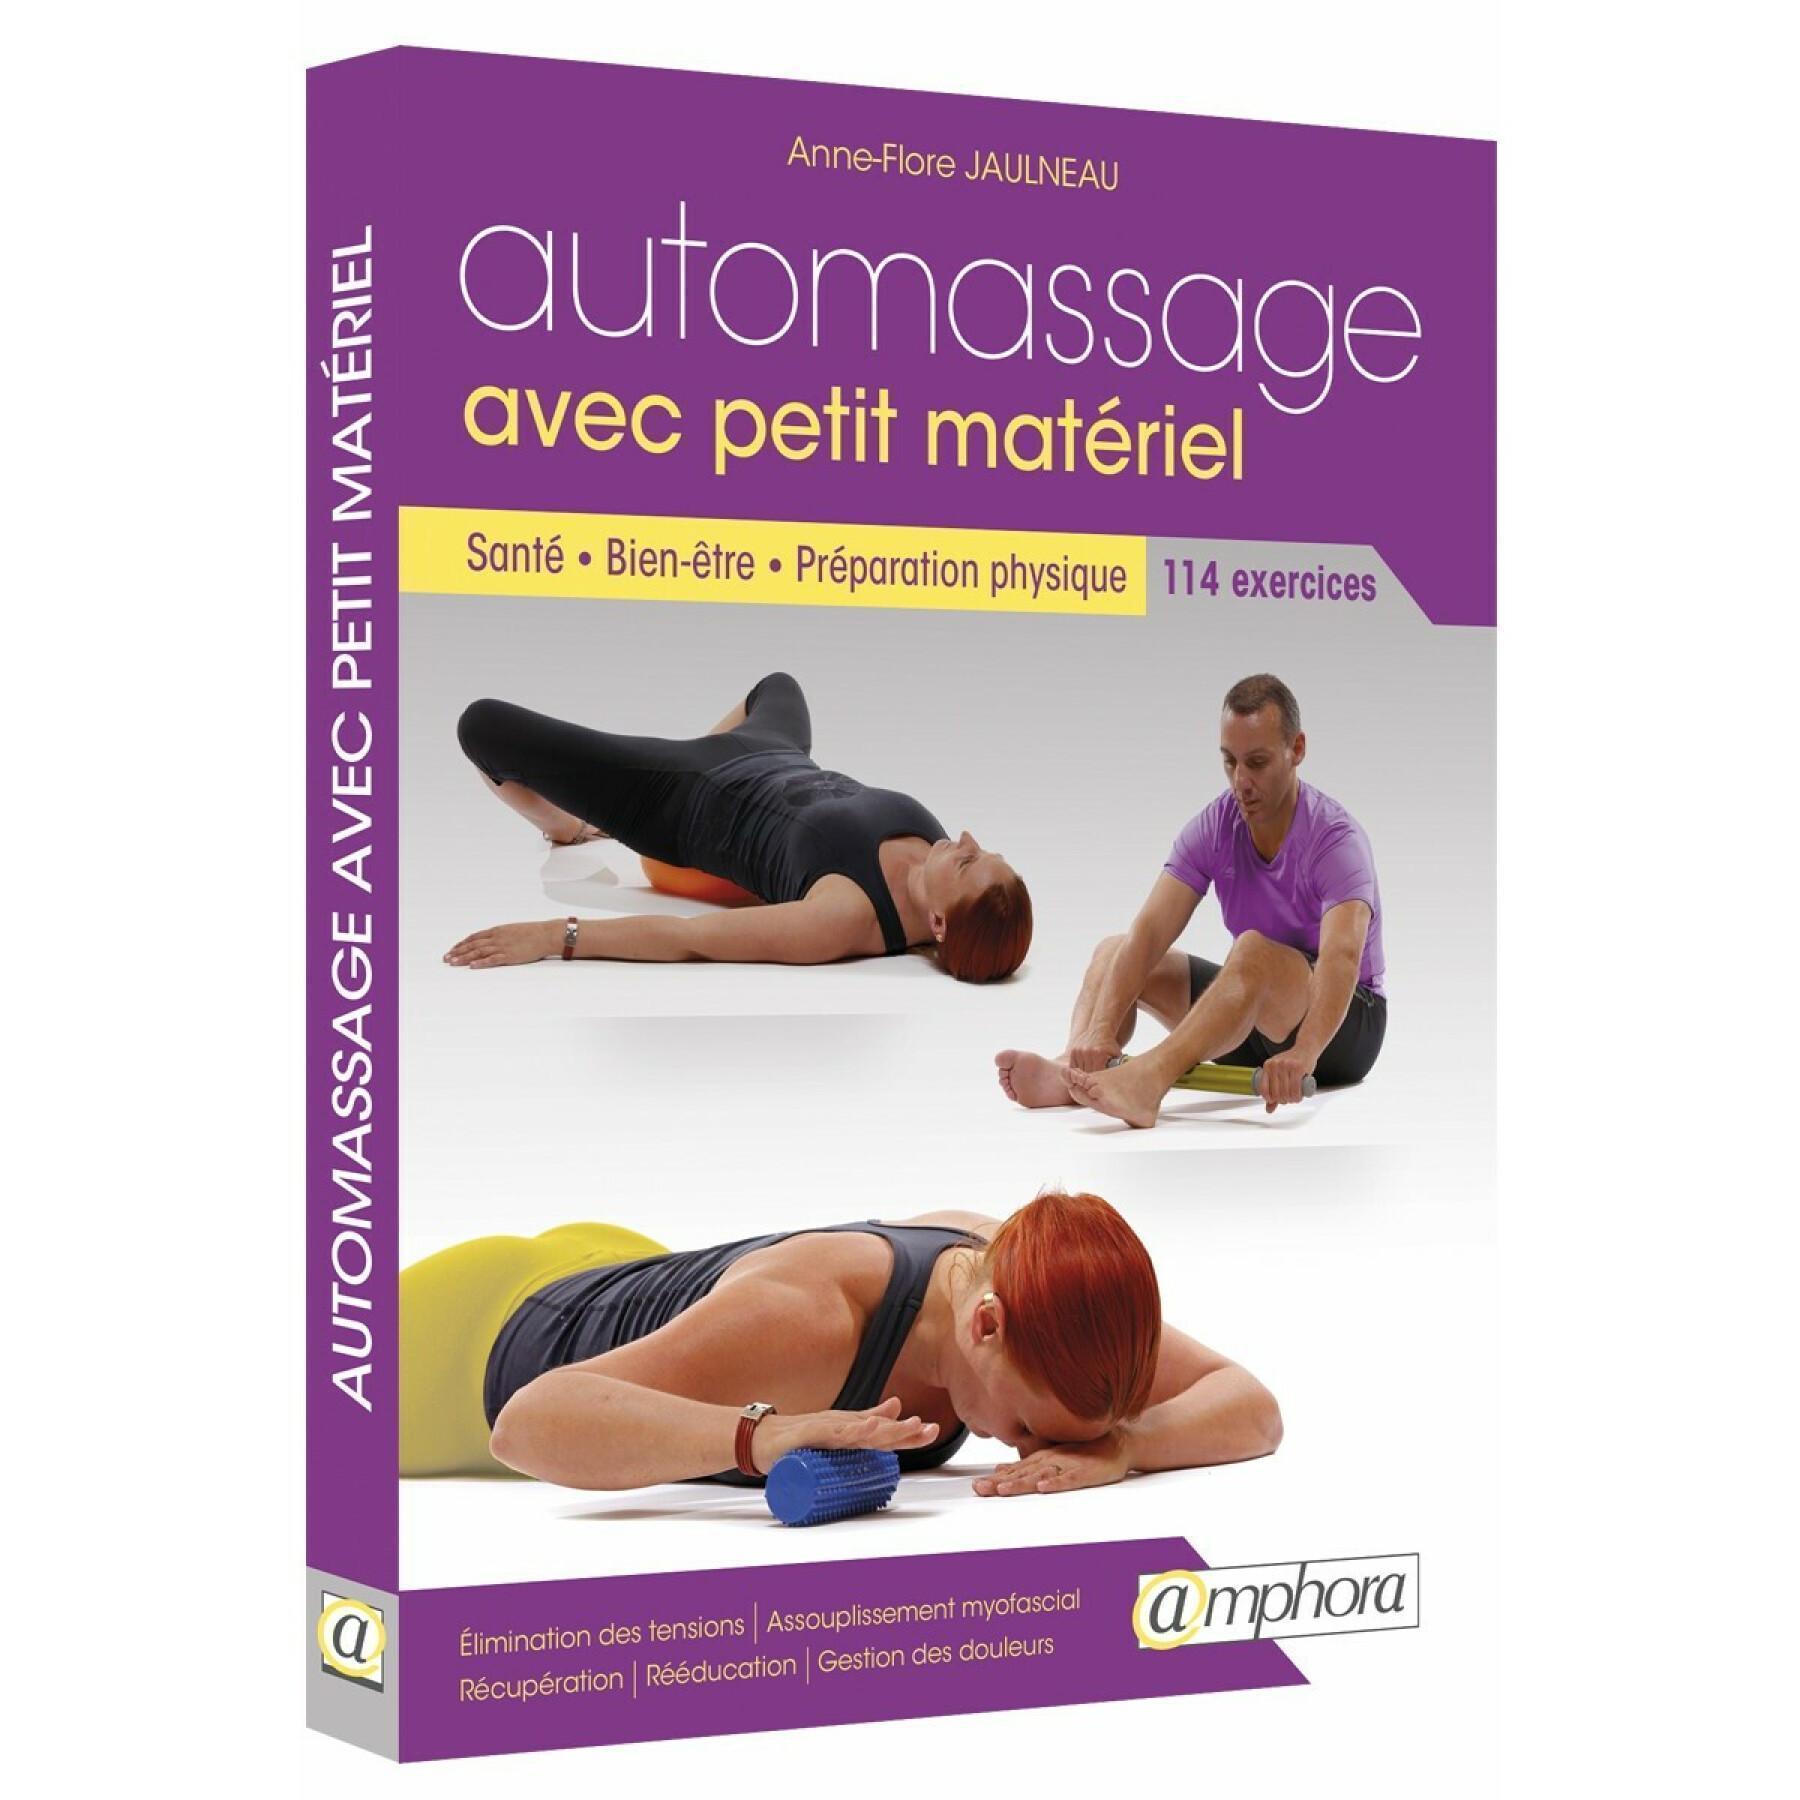 Self-massage book with small material Amphora